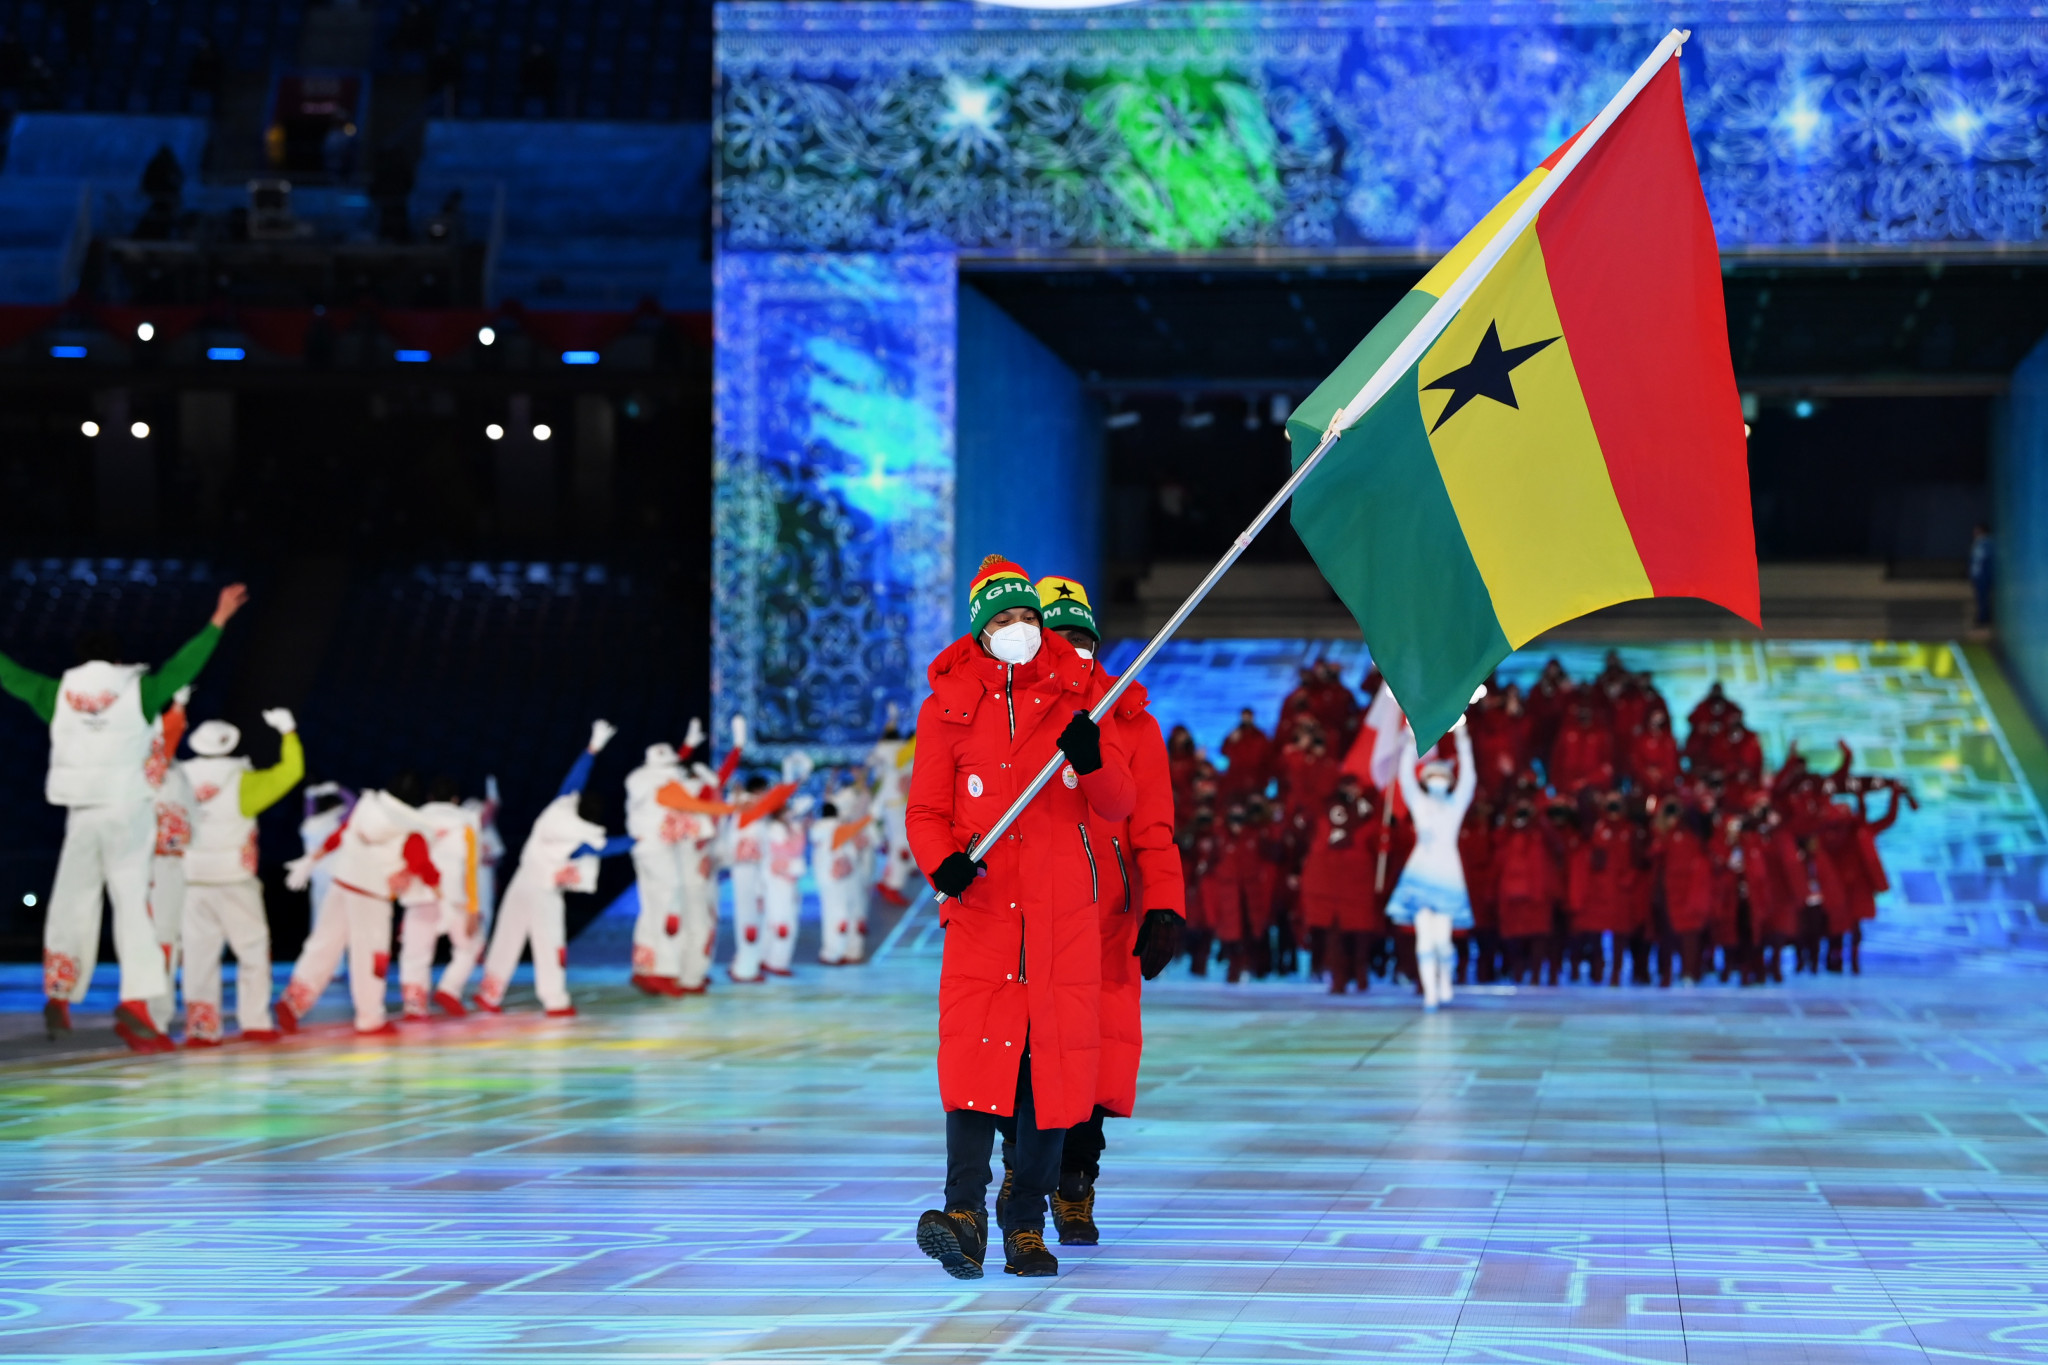 Carlos Mäder is the only Ghanaian representative at the Games after Frimpong failed to qualify for Beijing 2022 ©Getty Images